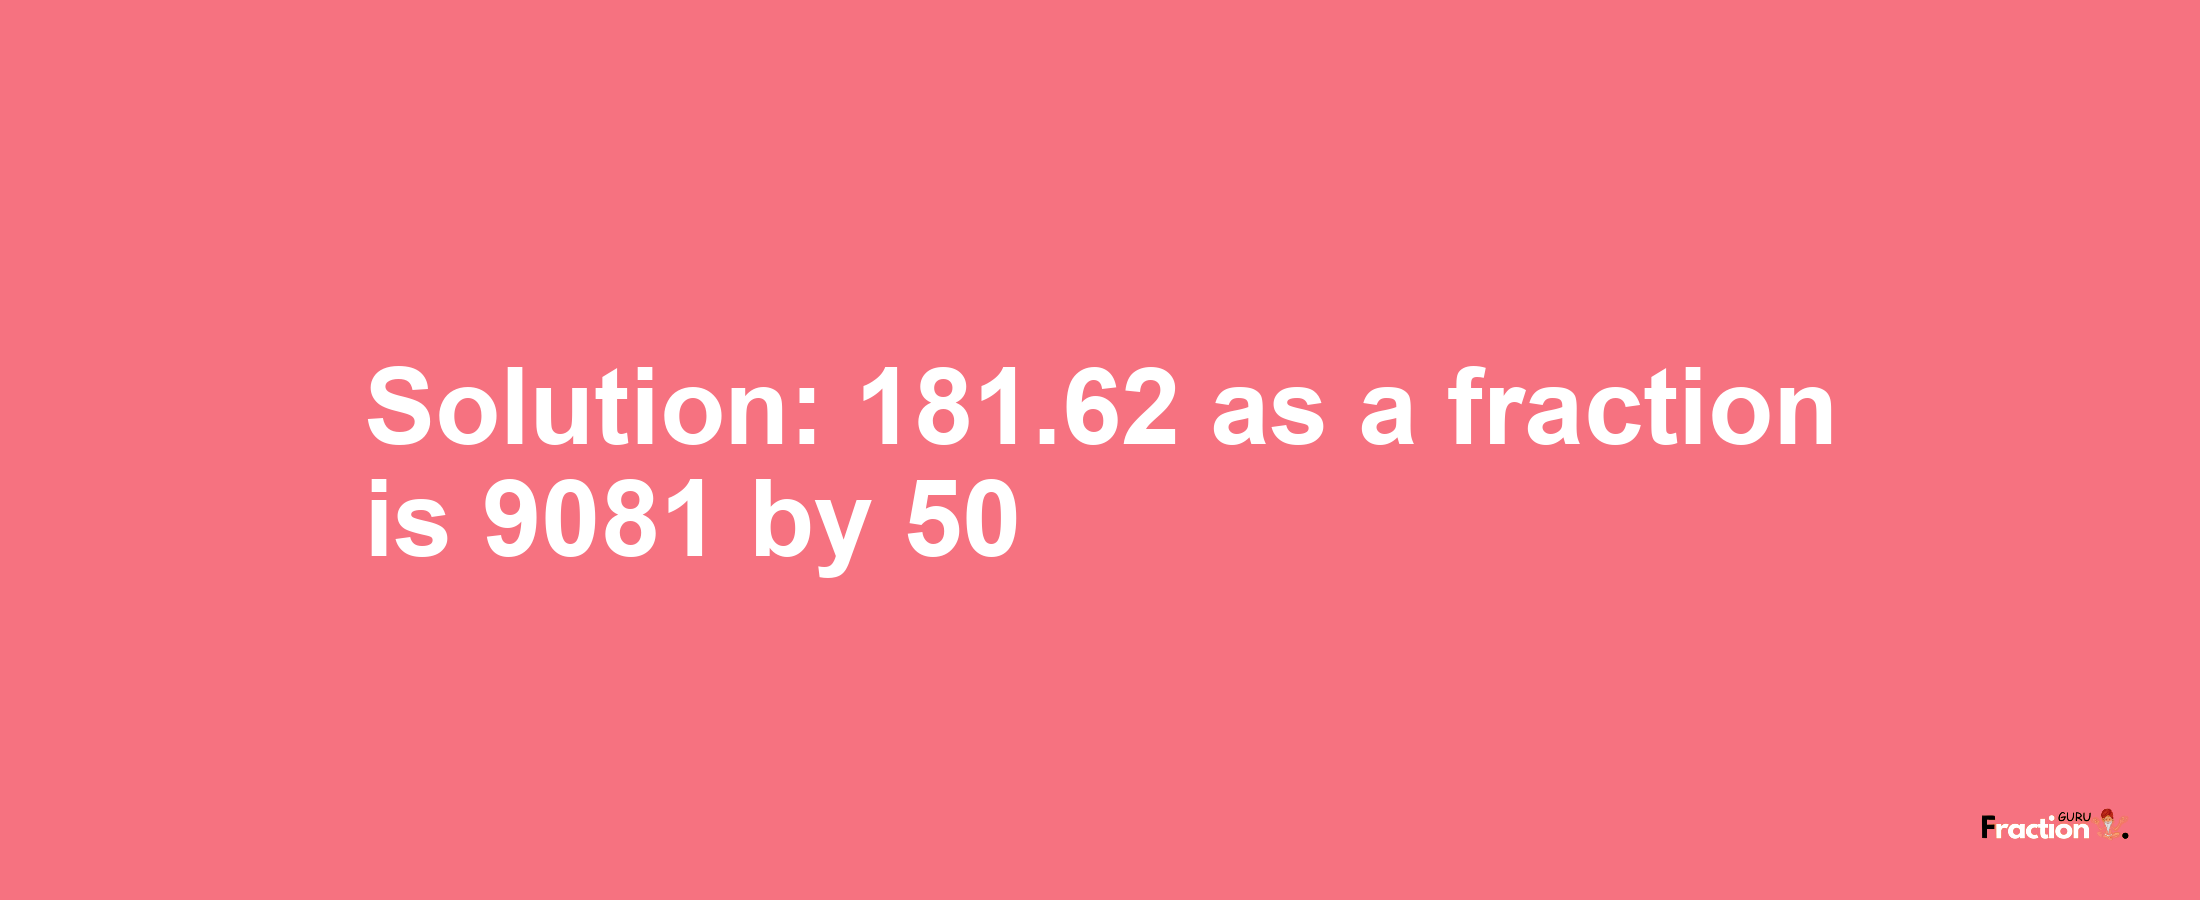 Solution:181.62 as a fraction is 9081/50